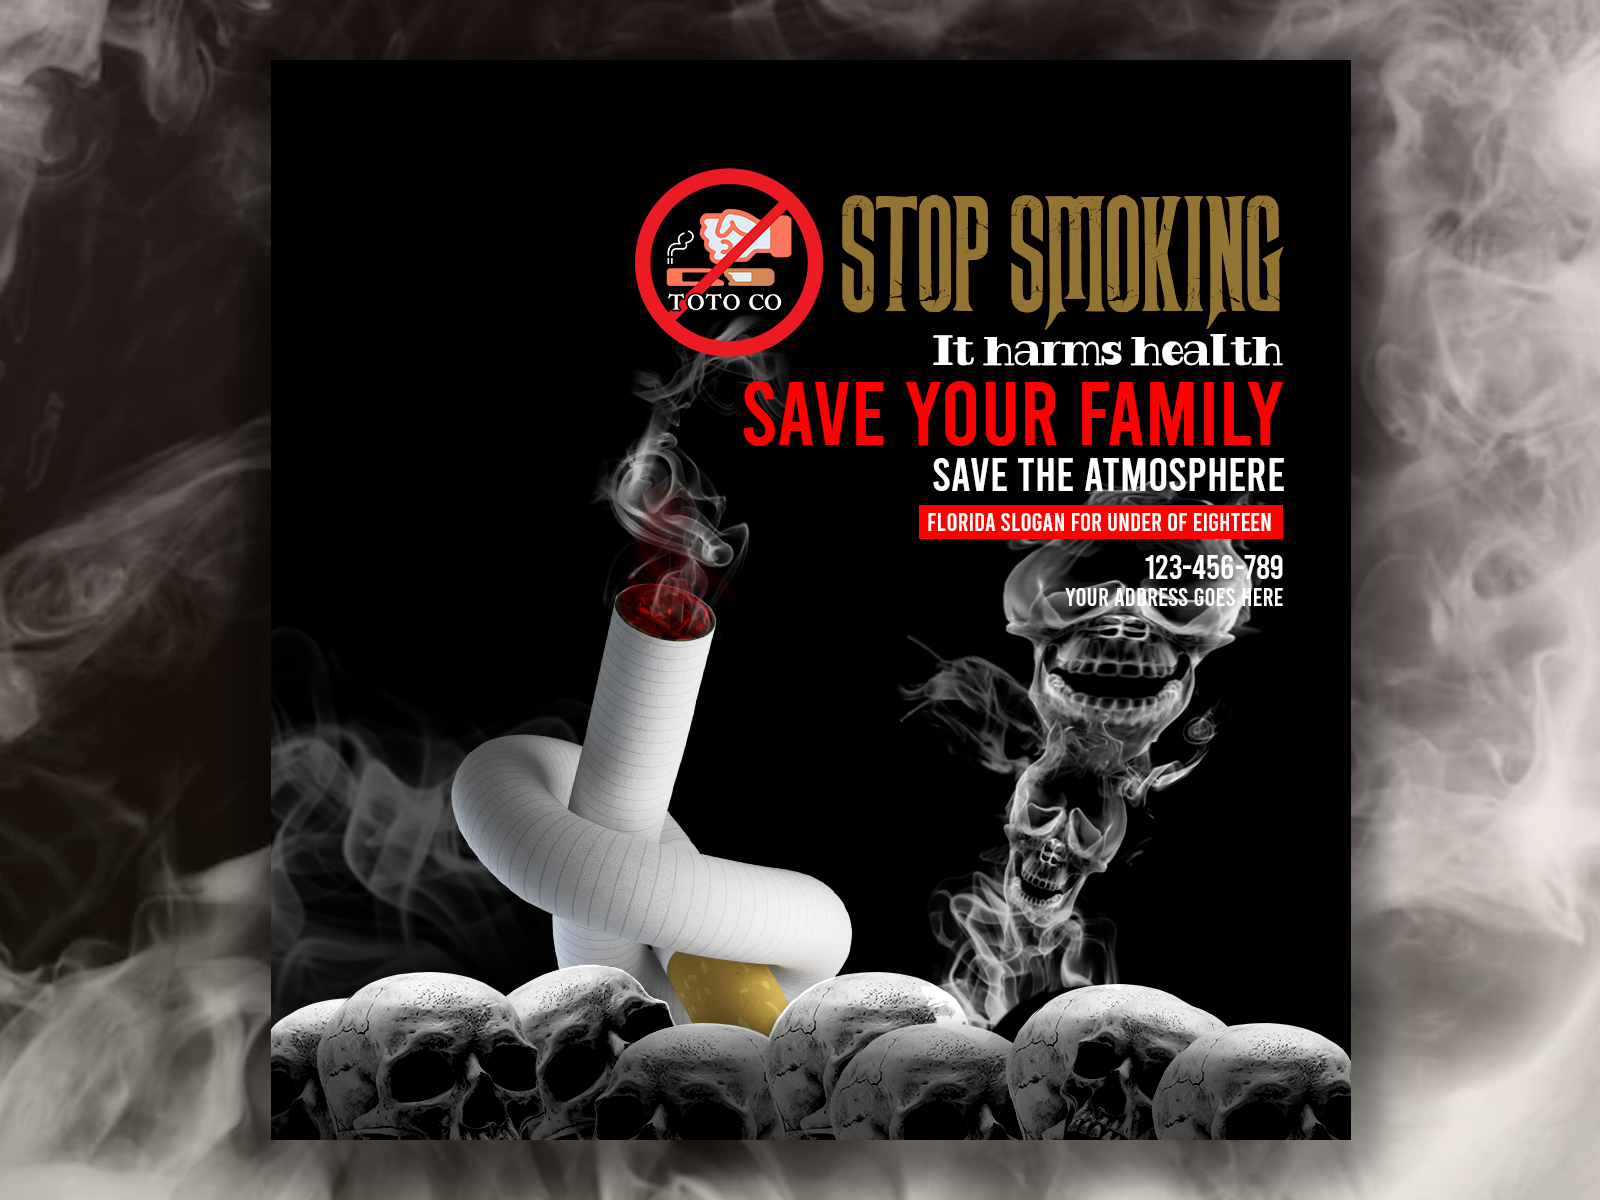 anti smoking slogans and posters